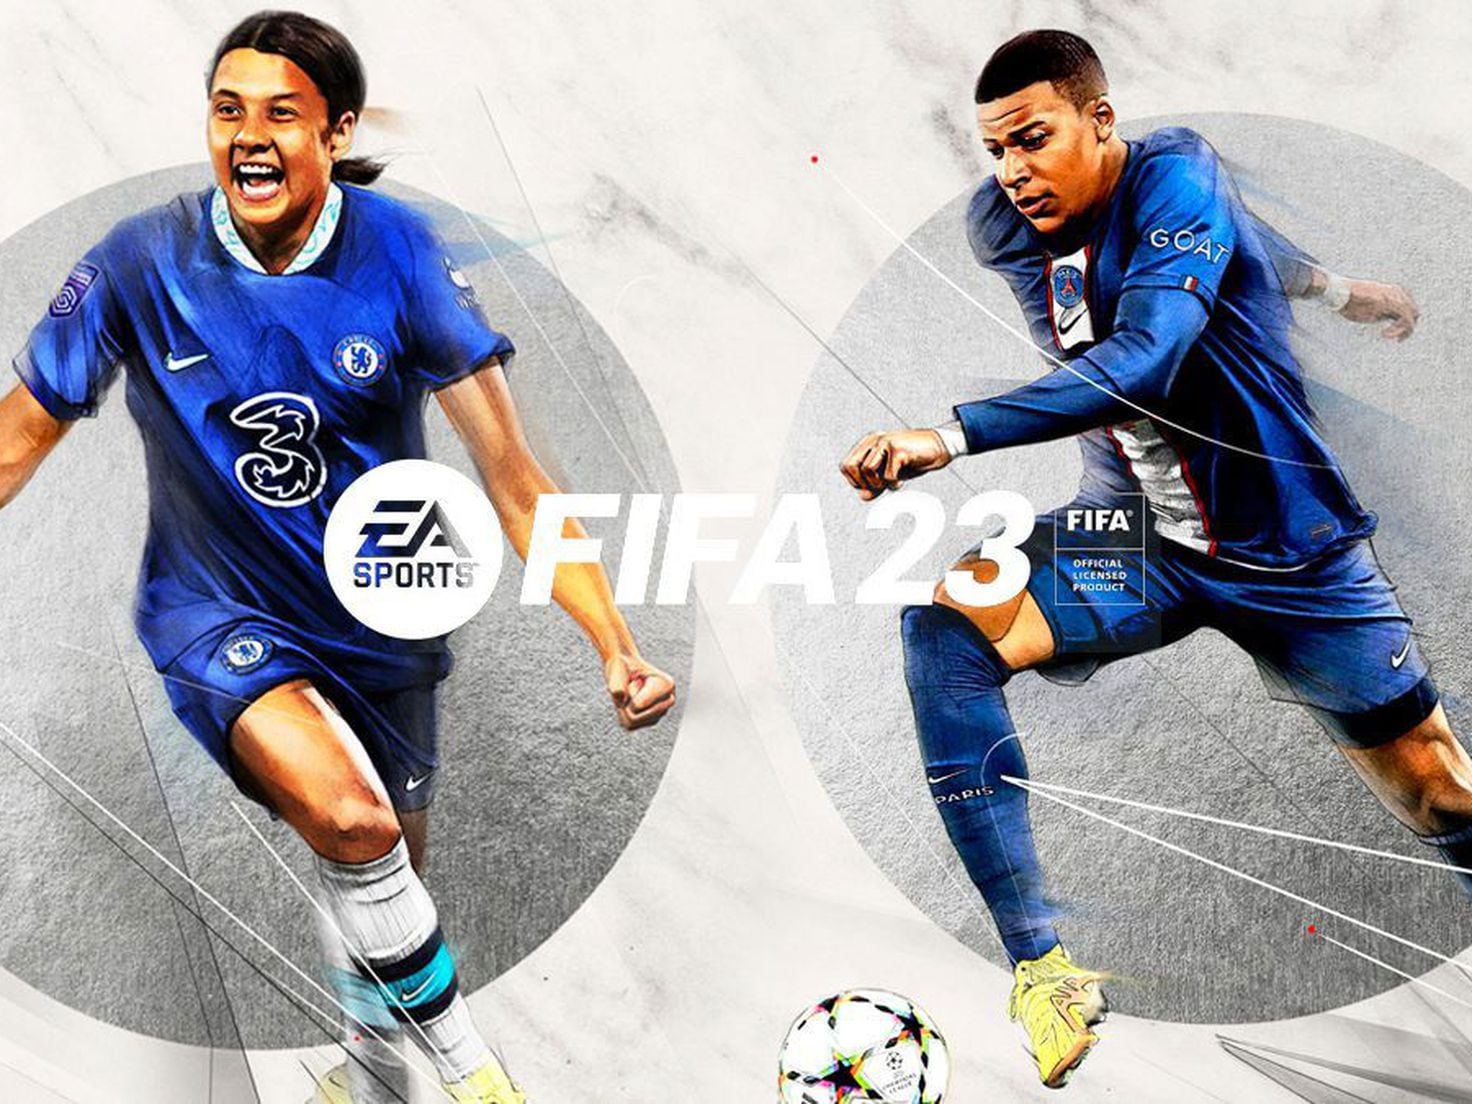 FIFA 23 system requirements – prep your gaming PC for kick off